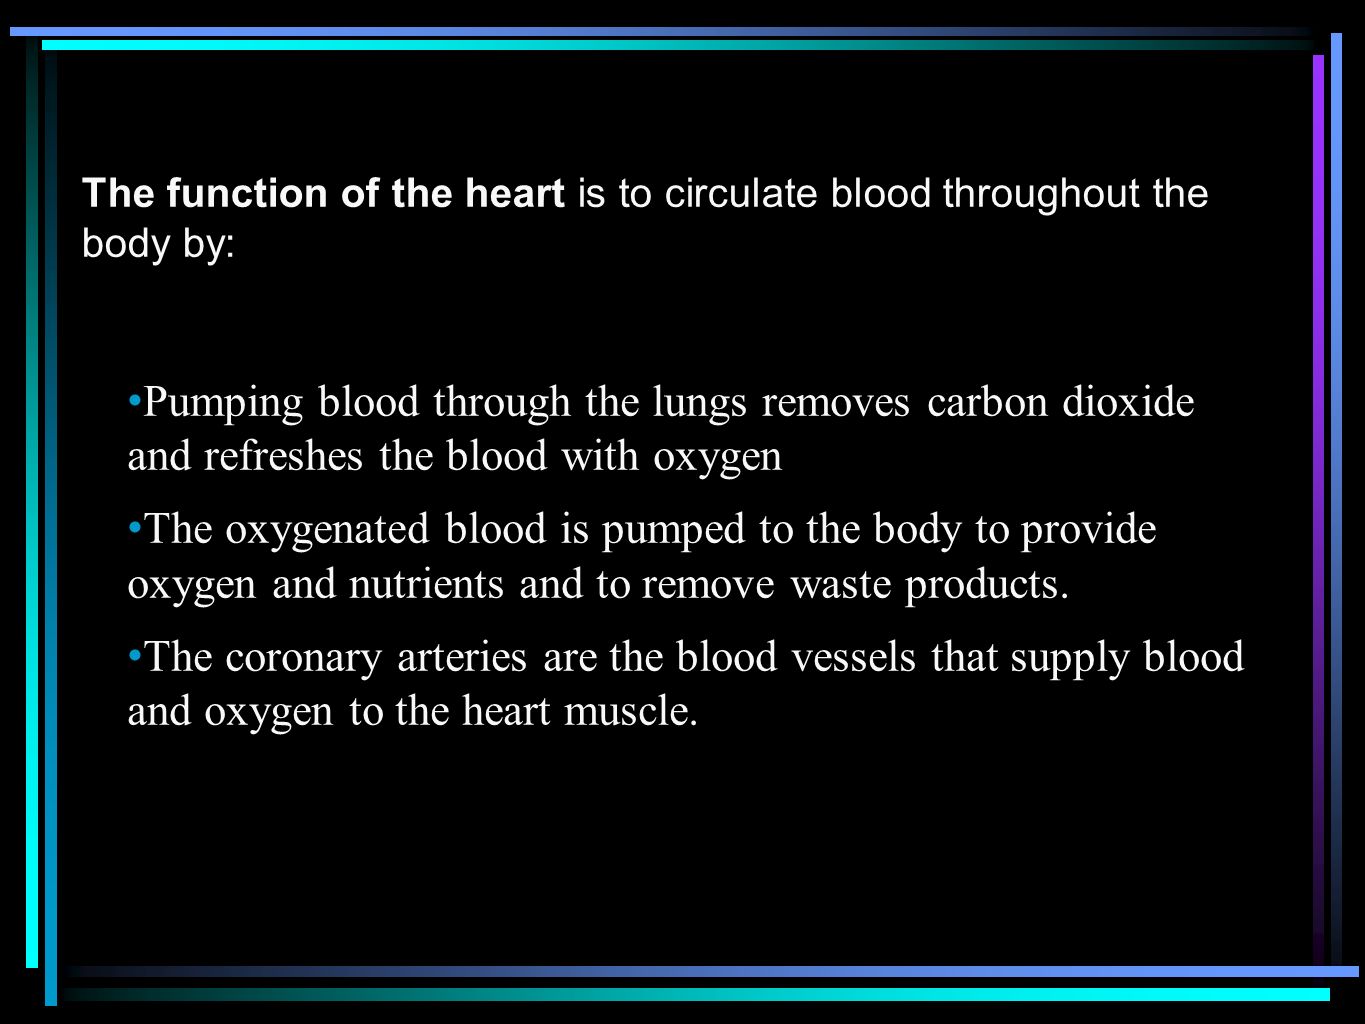 The function of the heart is to circulate blood throughout the body by: Pumping blood through the lungs removes carbon dioxide and refreshes the blood with oxygen The oxygenated blood is pumped to the body to provide oxygen and nutrients and to remove waste products.